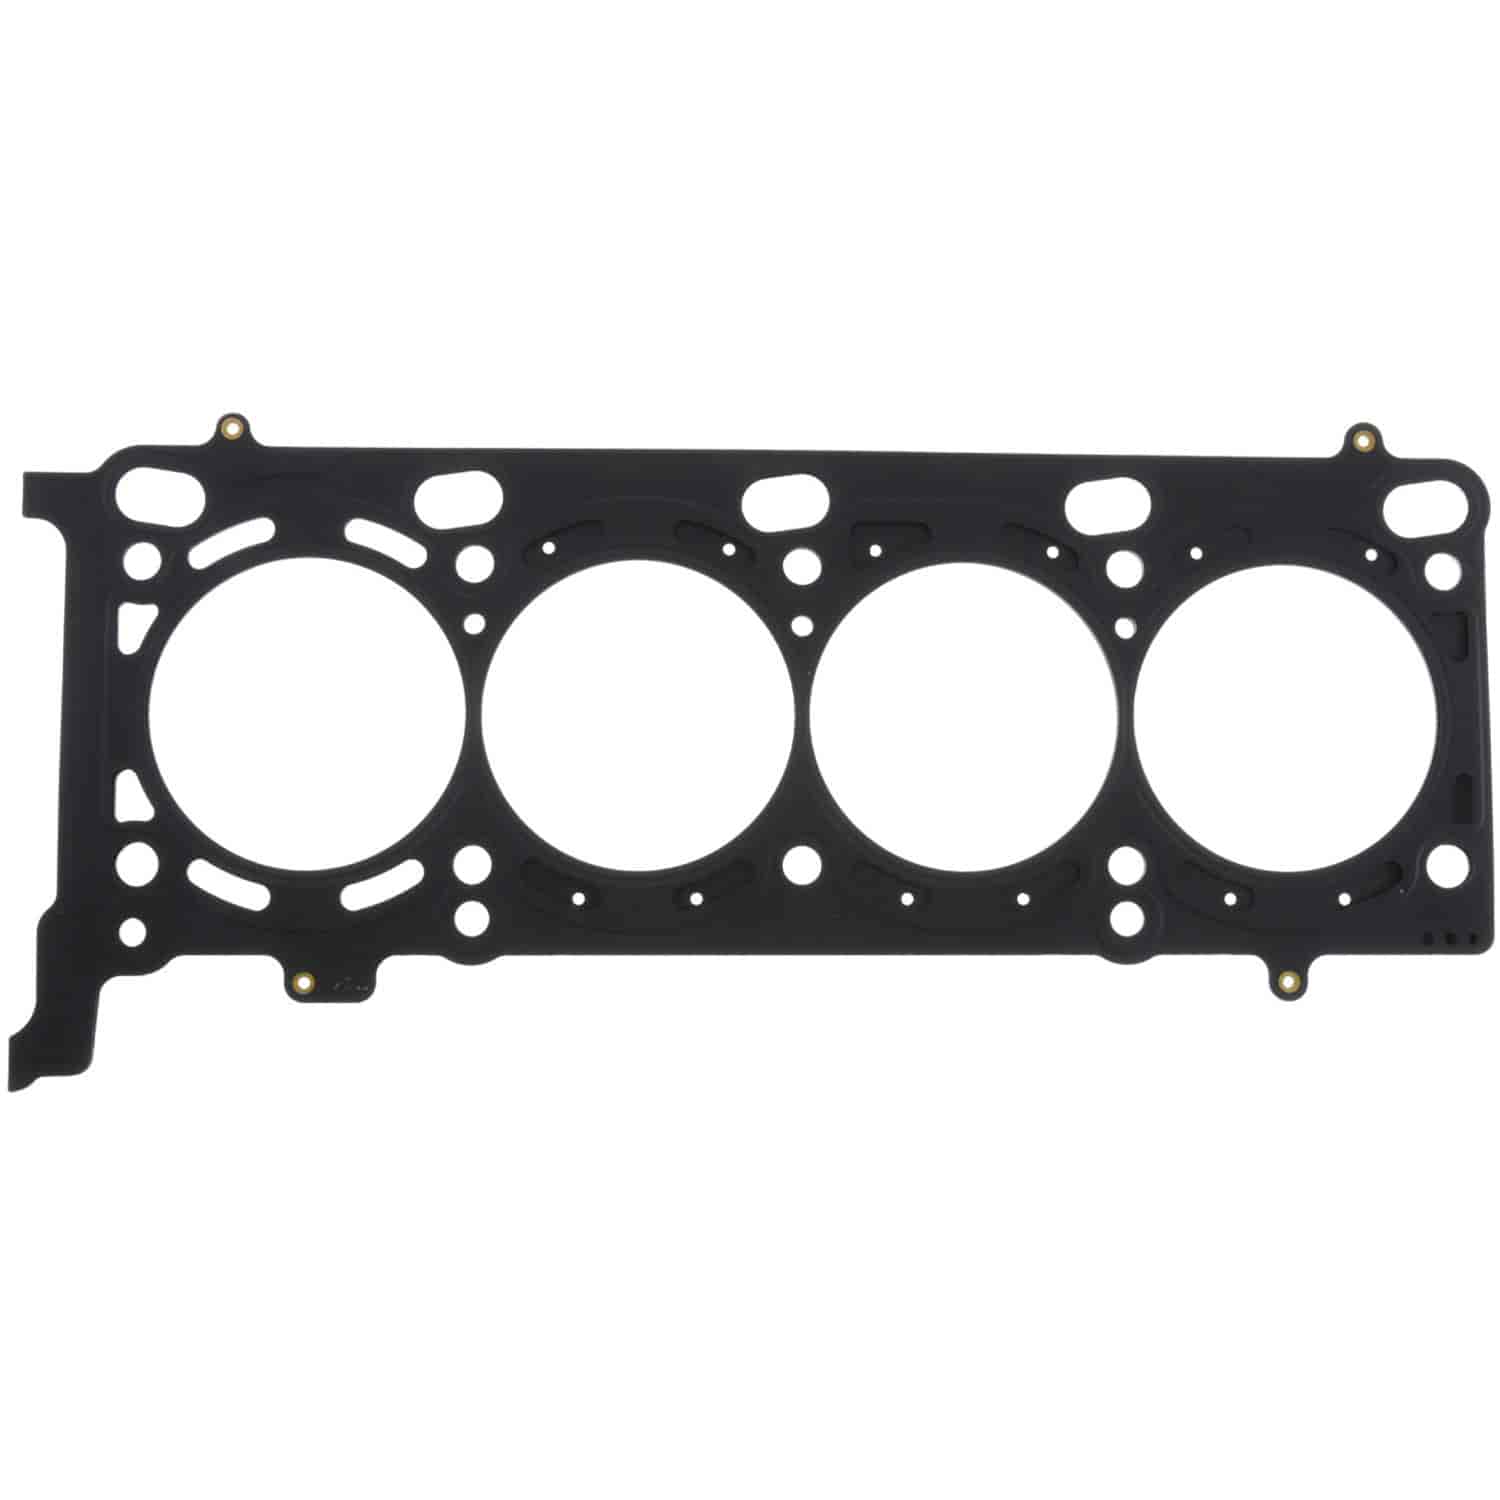 Cylinder Head Gasket Right BMW 4398CC 4.4L M62 DOHC 32V FROM 10/97